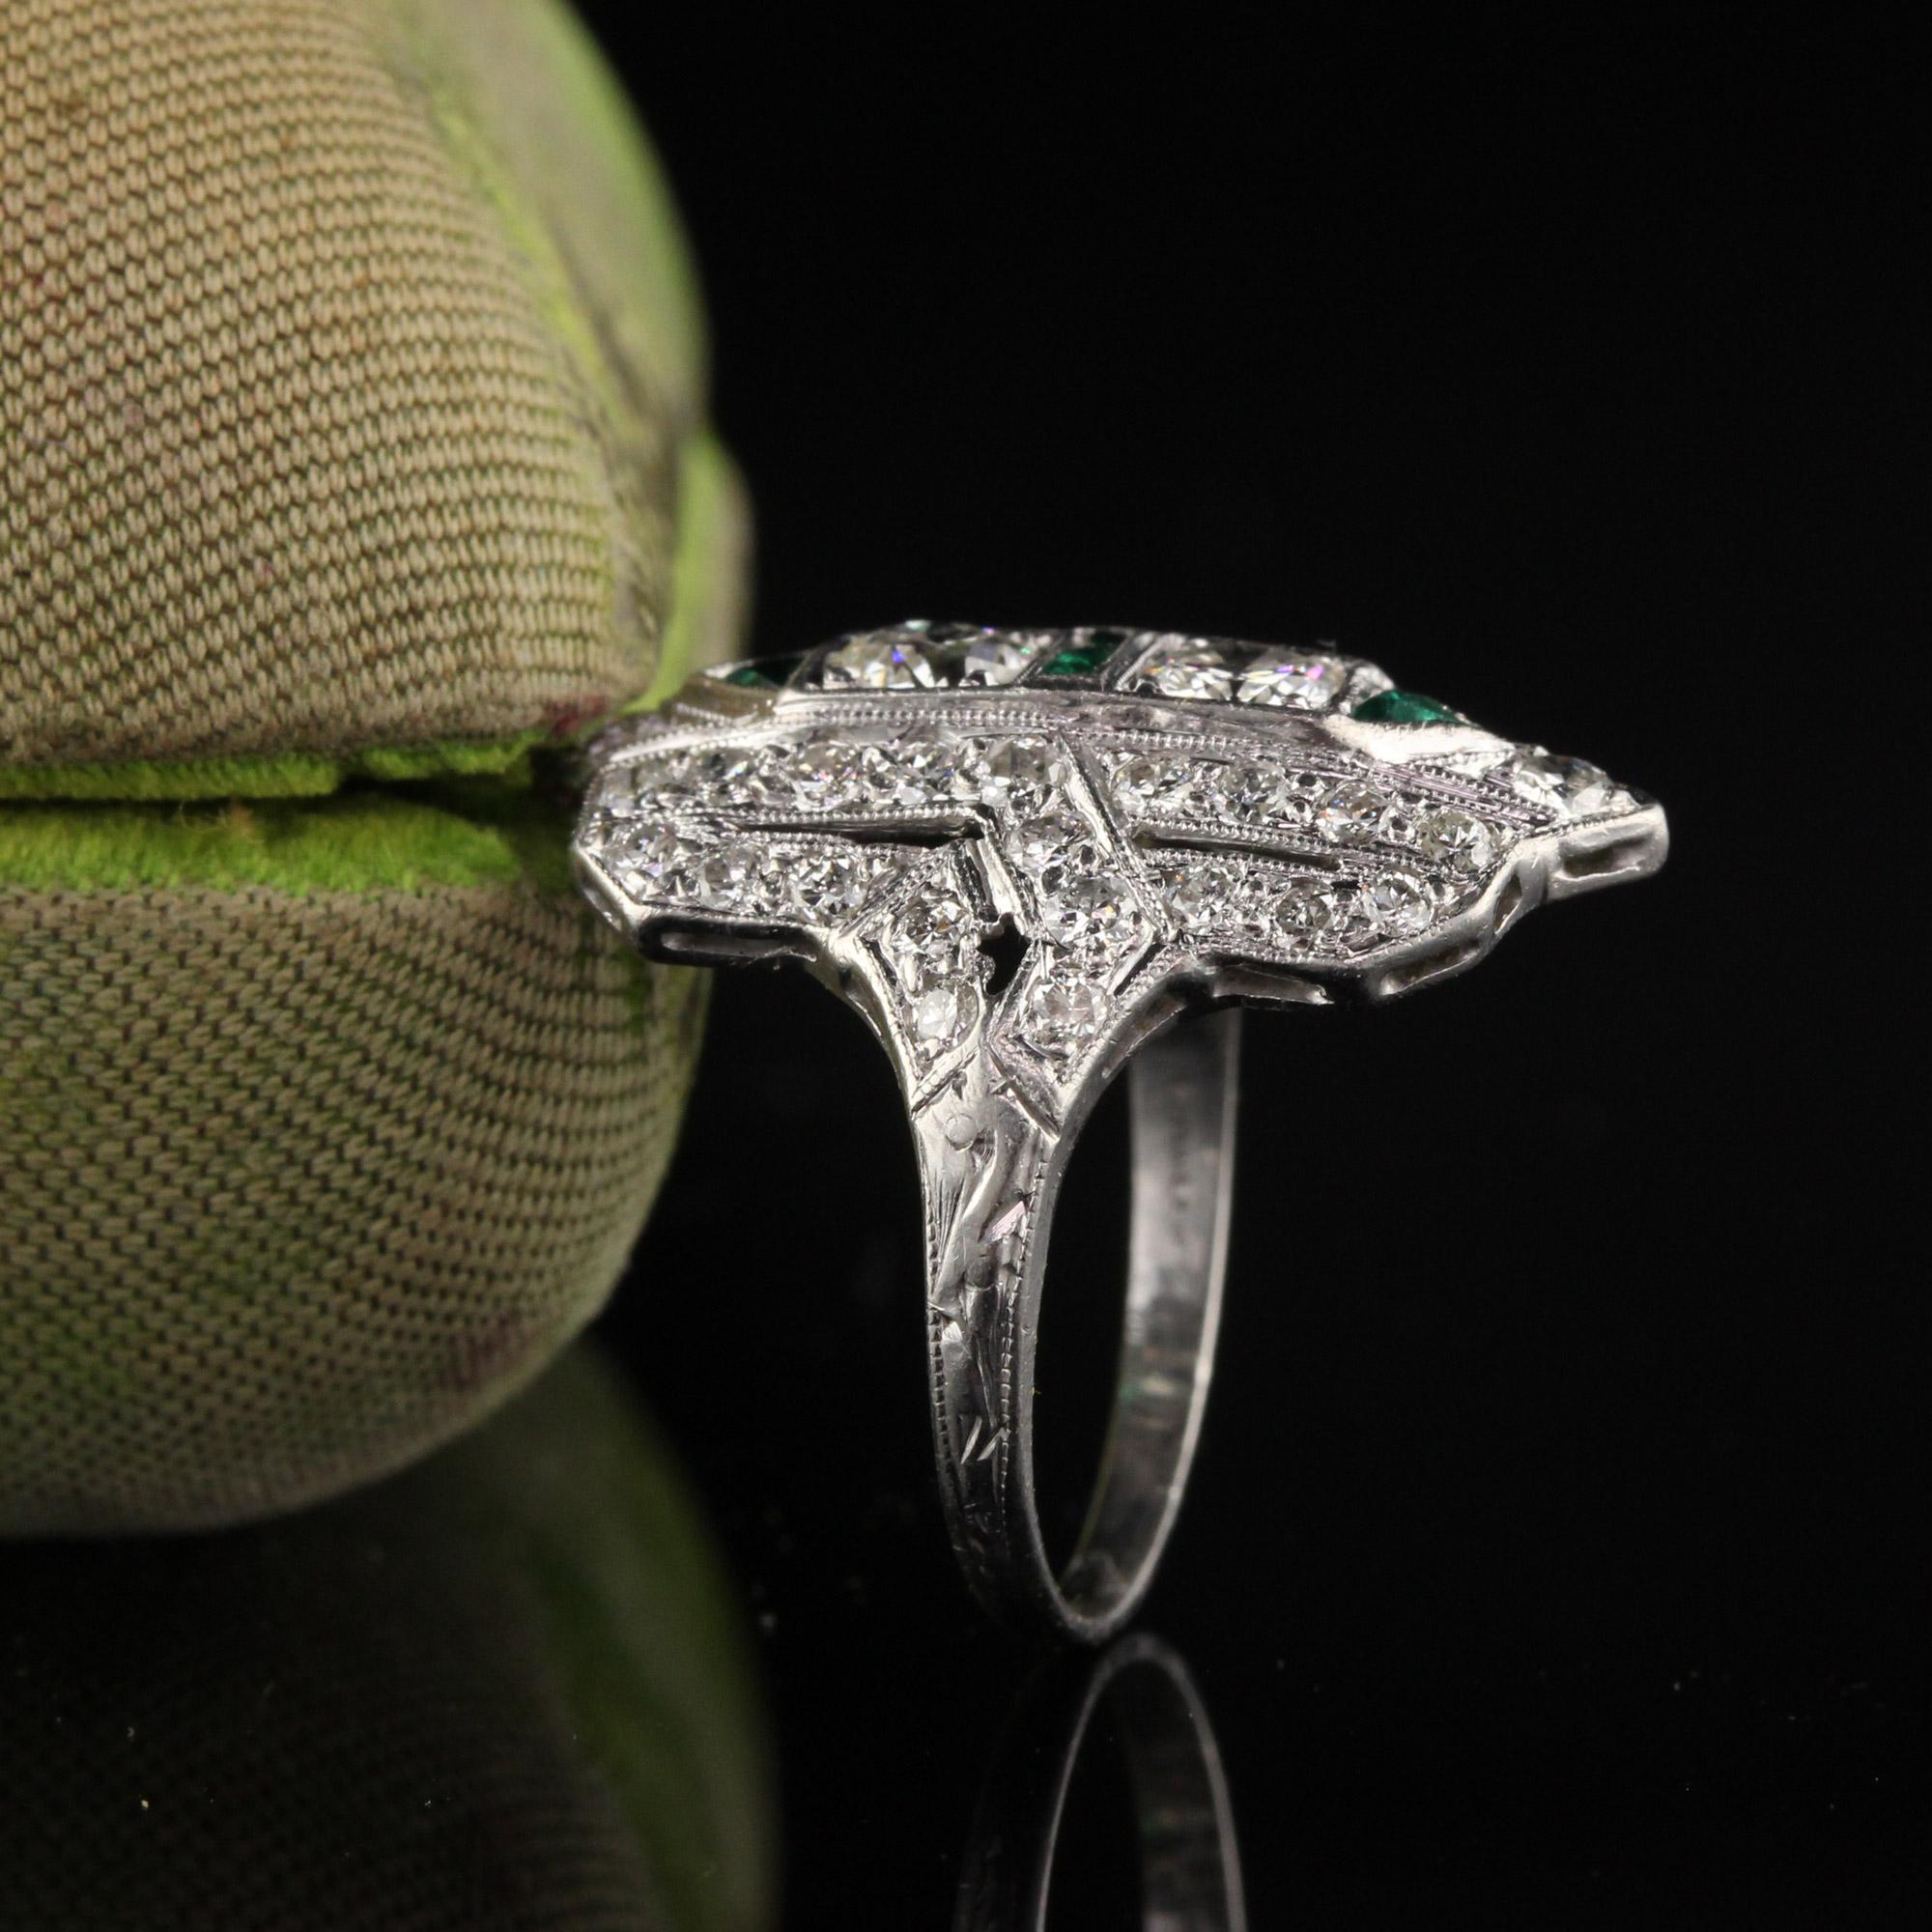 Beautiful antique shield ring with old european cut diamonds and emeralds. 

Item #R0555

Metal: Platinum

Weight: 3.3 Grams

Total Diamond Weight: Approximately 1.00 cts

Diamond Color: H

Diamond Clarity: VS1

Ring Size: 4.25 

This ring can be